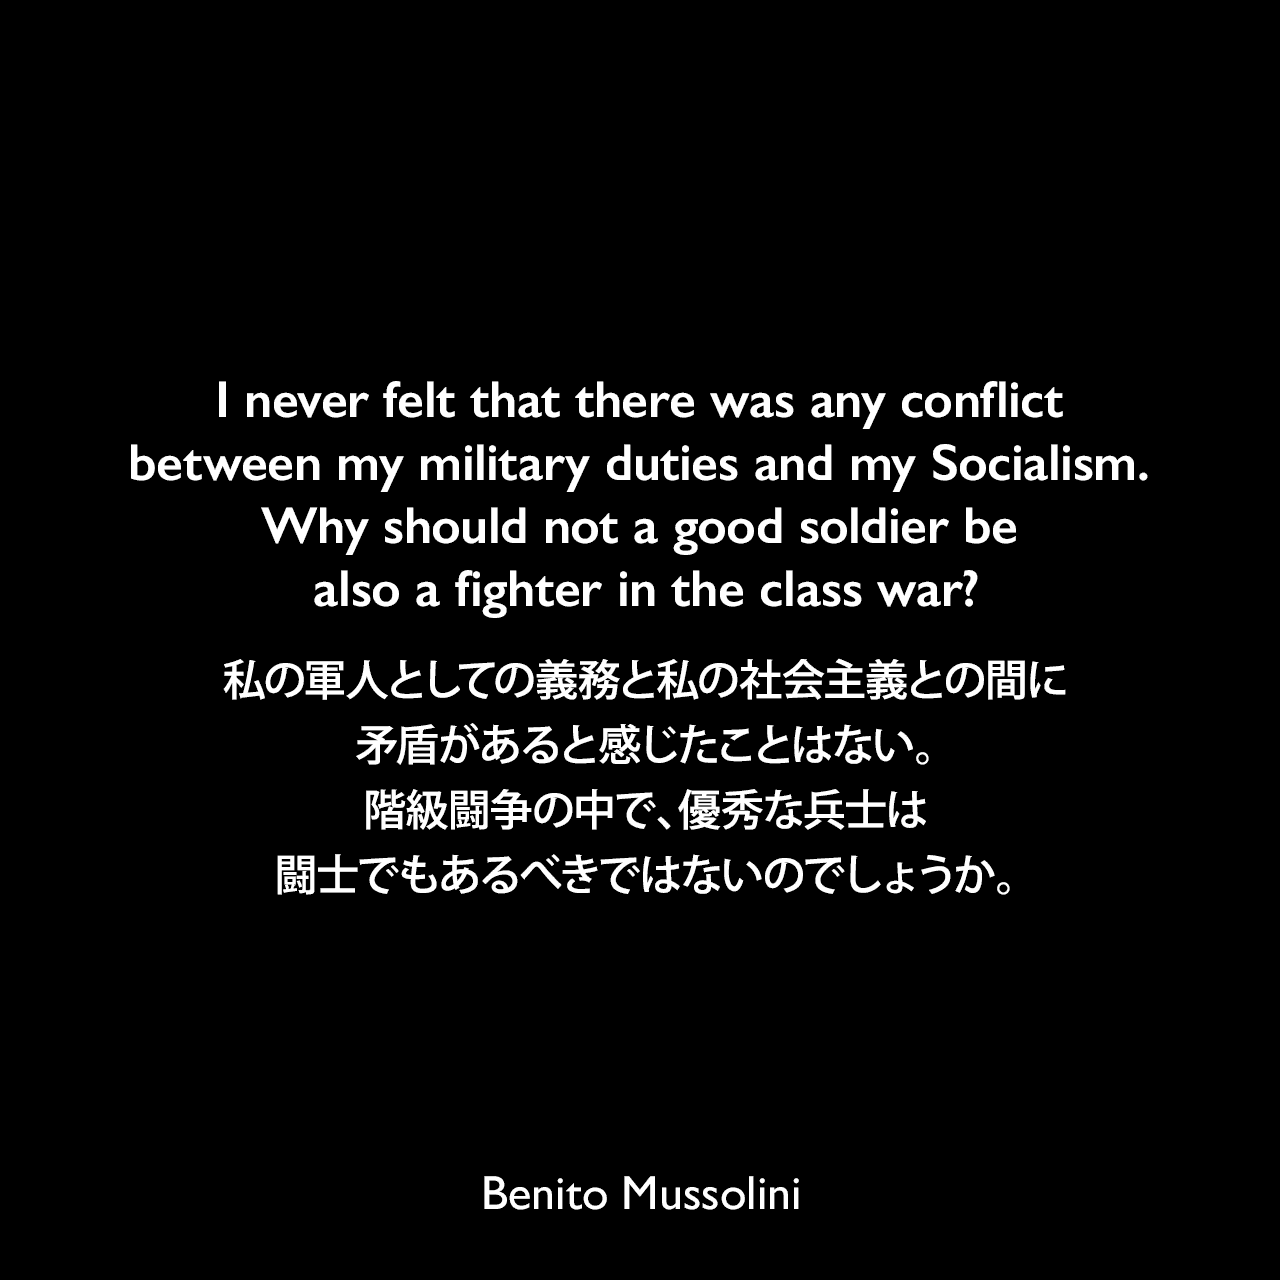 I never felt that there was any conflict between my military duties and my Socialism. Why should not a good soldier be also a fighter in the class war?私の軍人としての義務と私の社会主義との間に矛盾があると感じたことはない。階級闘争の中で、優秀な兵士は闘士でもあるべきではないのでしょうか。- 1932年3月23日から4月4日、ローマのヴェネツィア宮殿でのインタビューよりBenito Mussolini